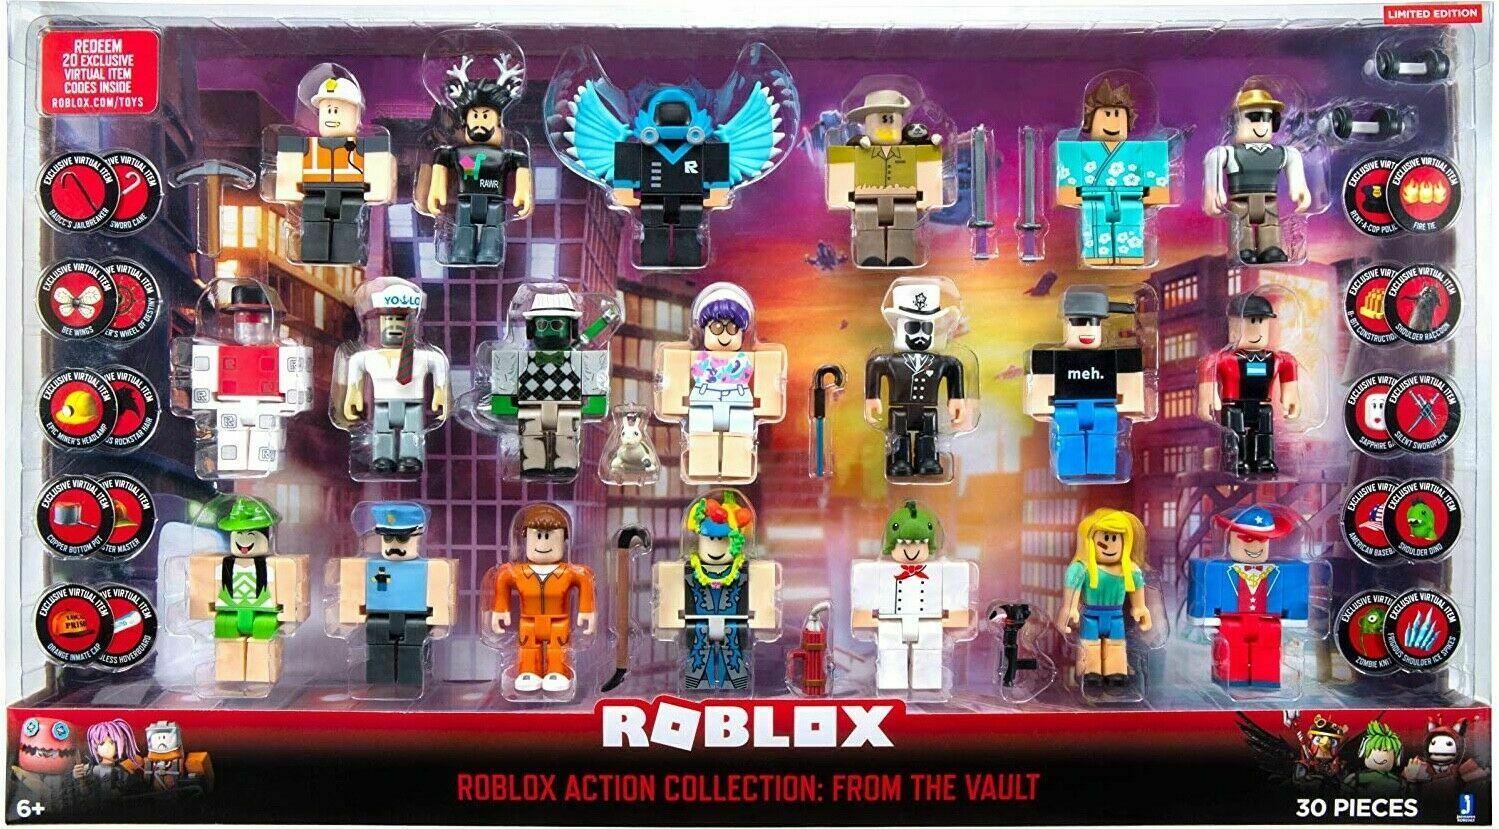 Earn $1.4 Million from Selling Virtual Items Inside Roblox Metaverse